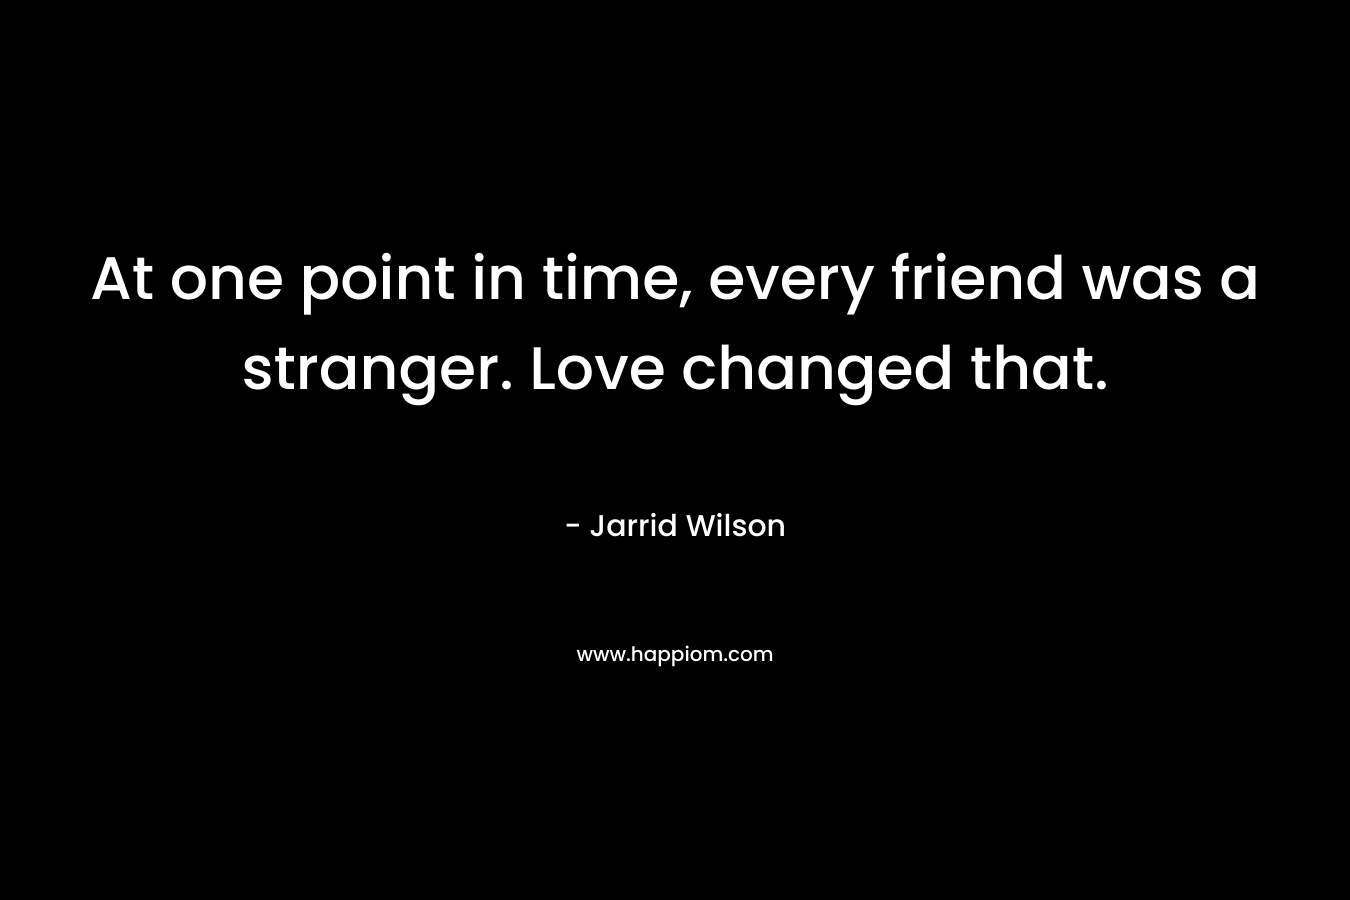 At one point in time, every friend was a stranger. Love changed that.